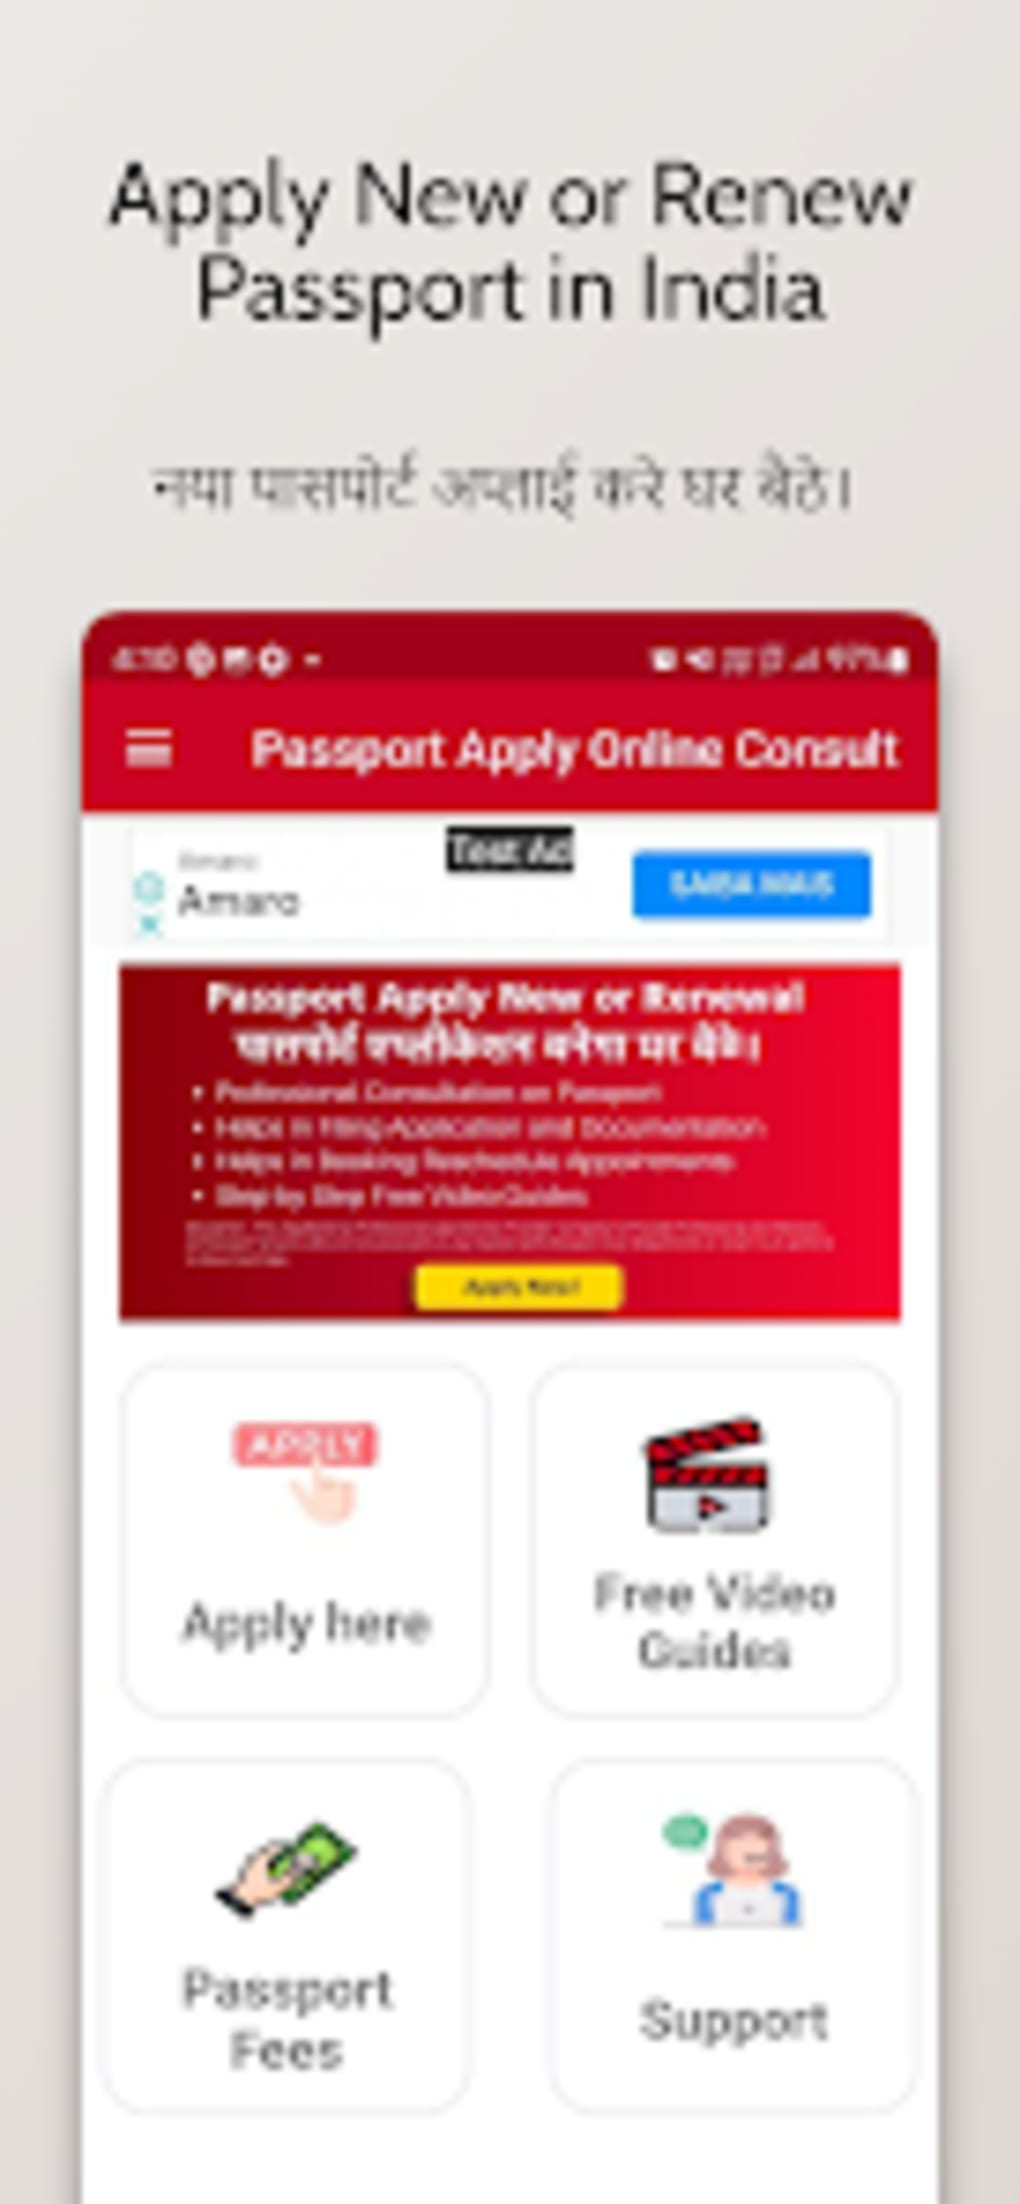 passport-apply-online-consult-for-android-download